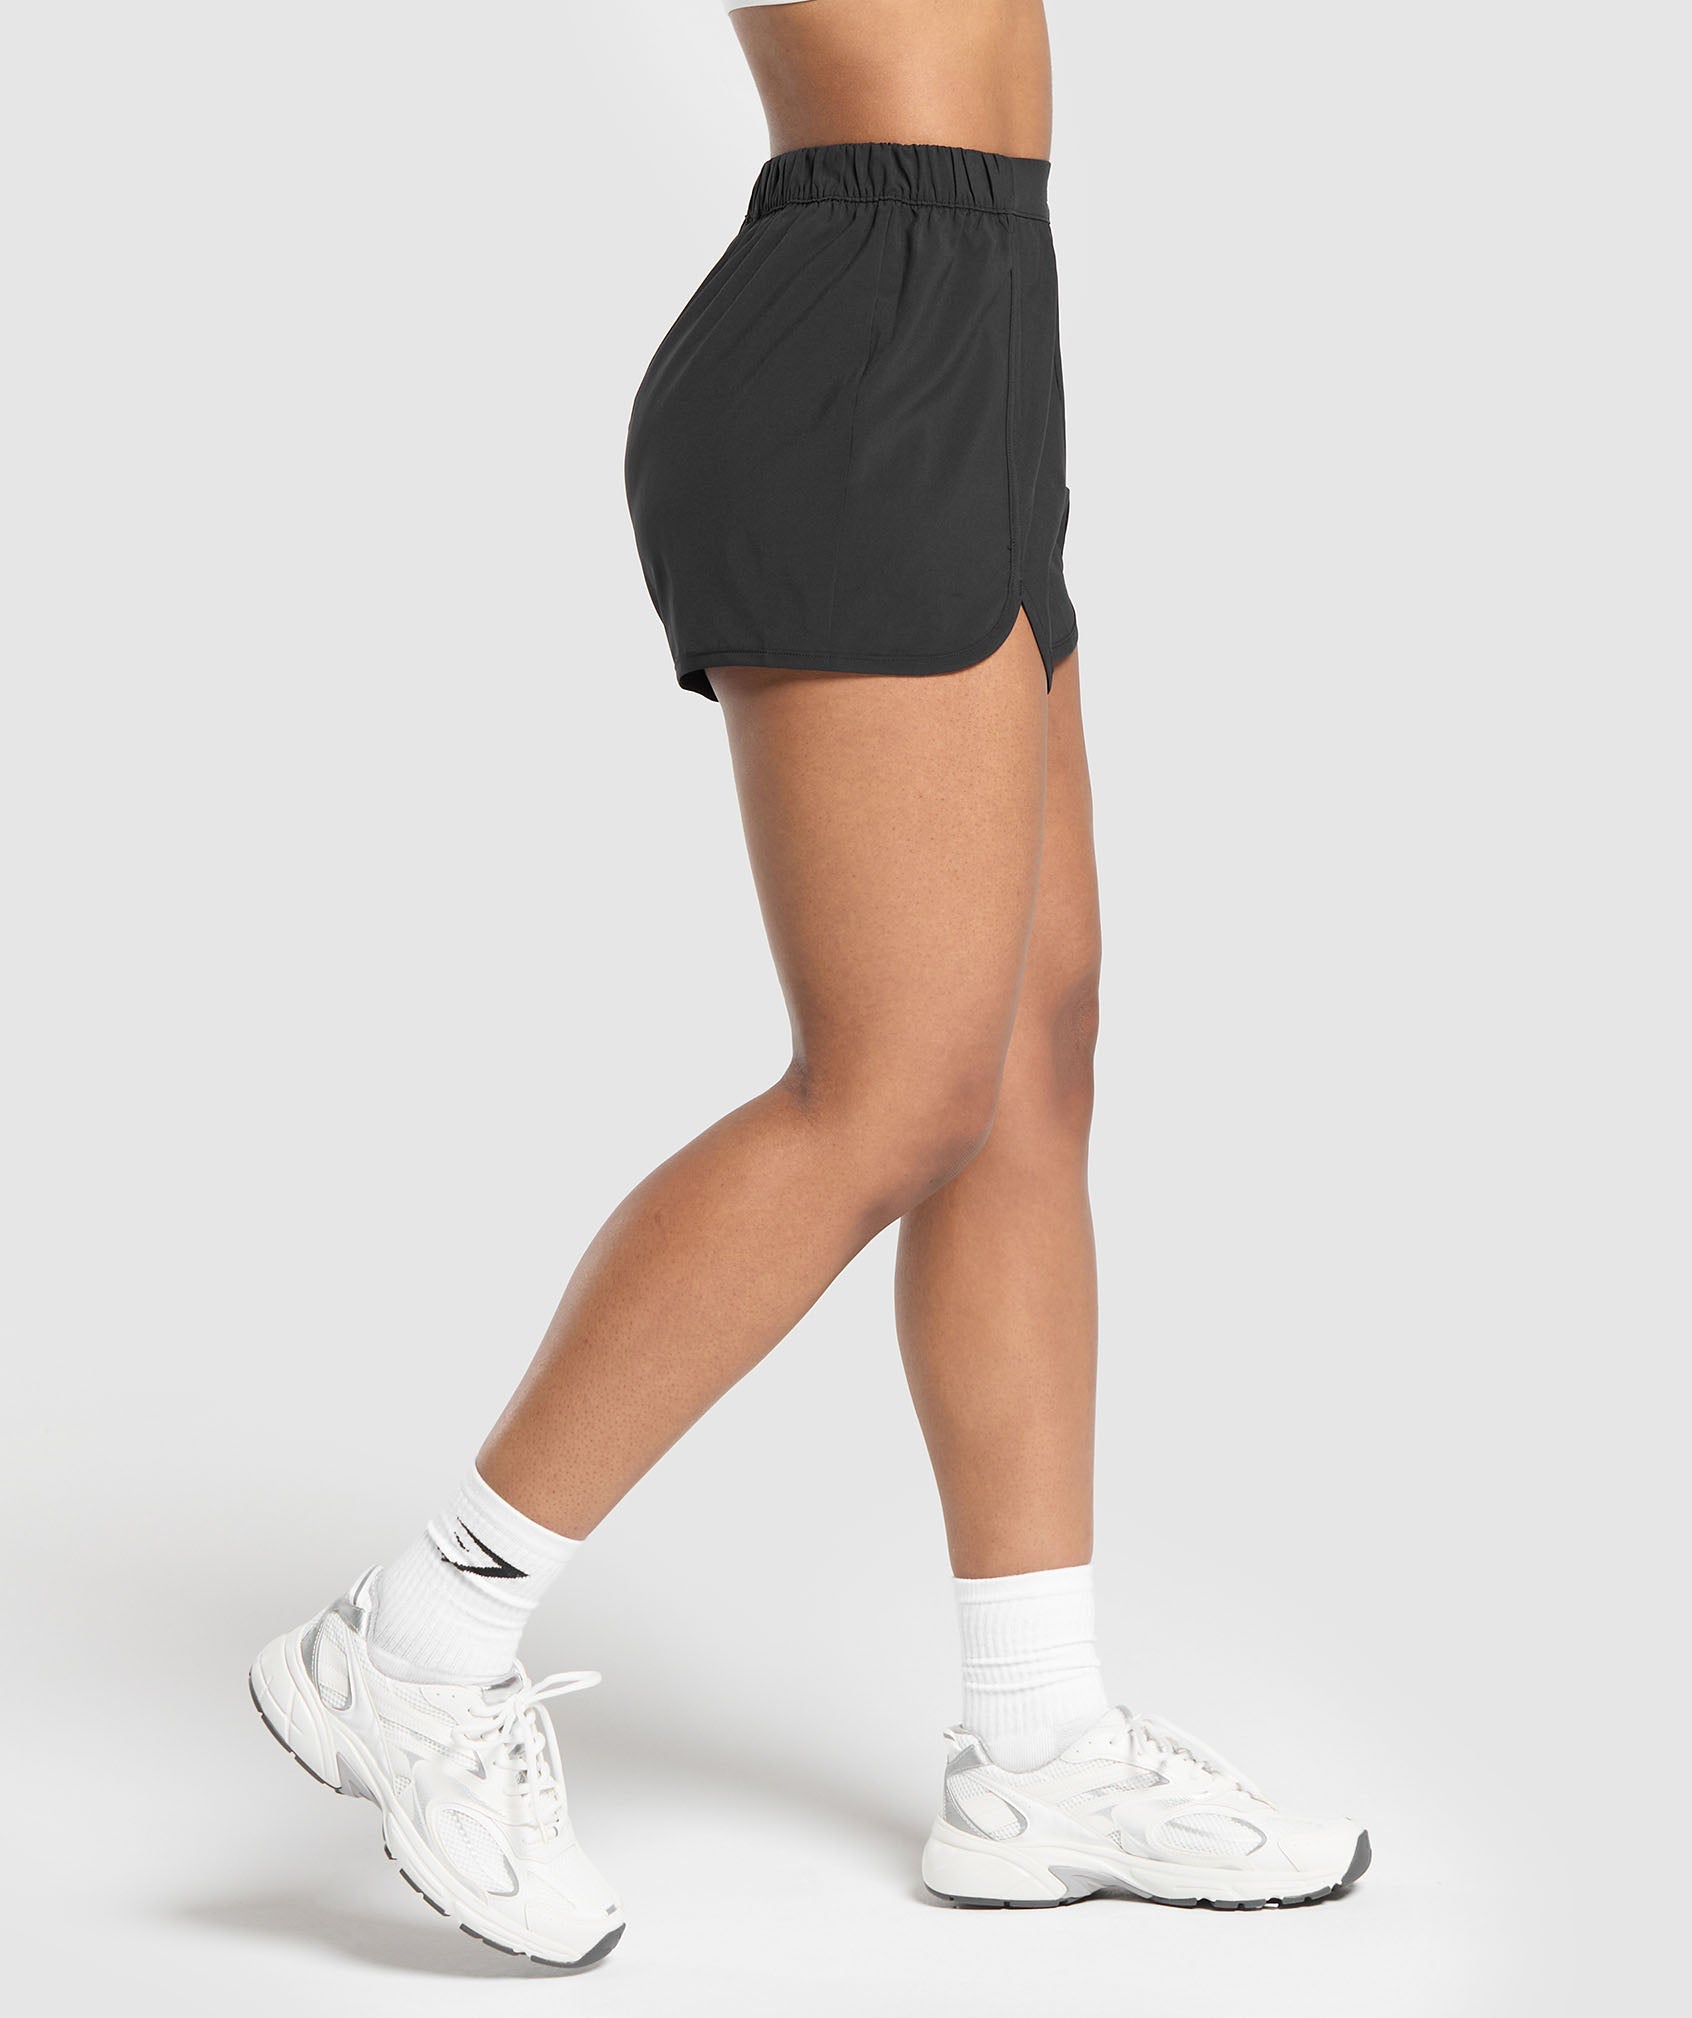 Scallop Hem Shaped Shorts in Black - view 3